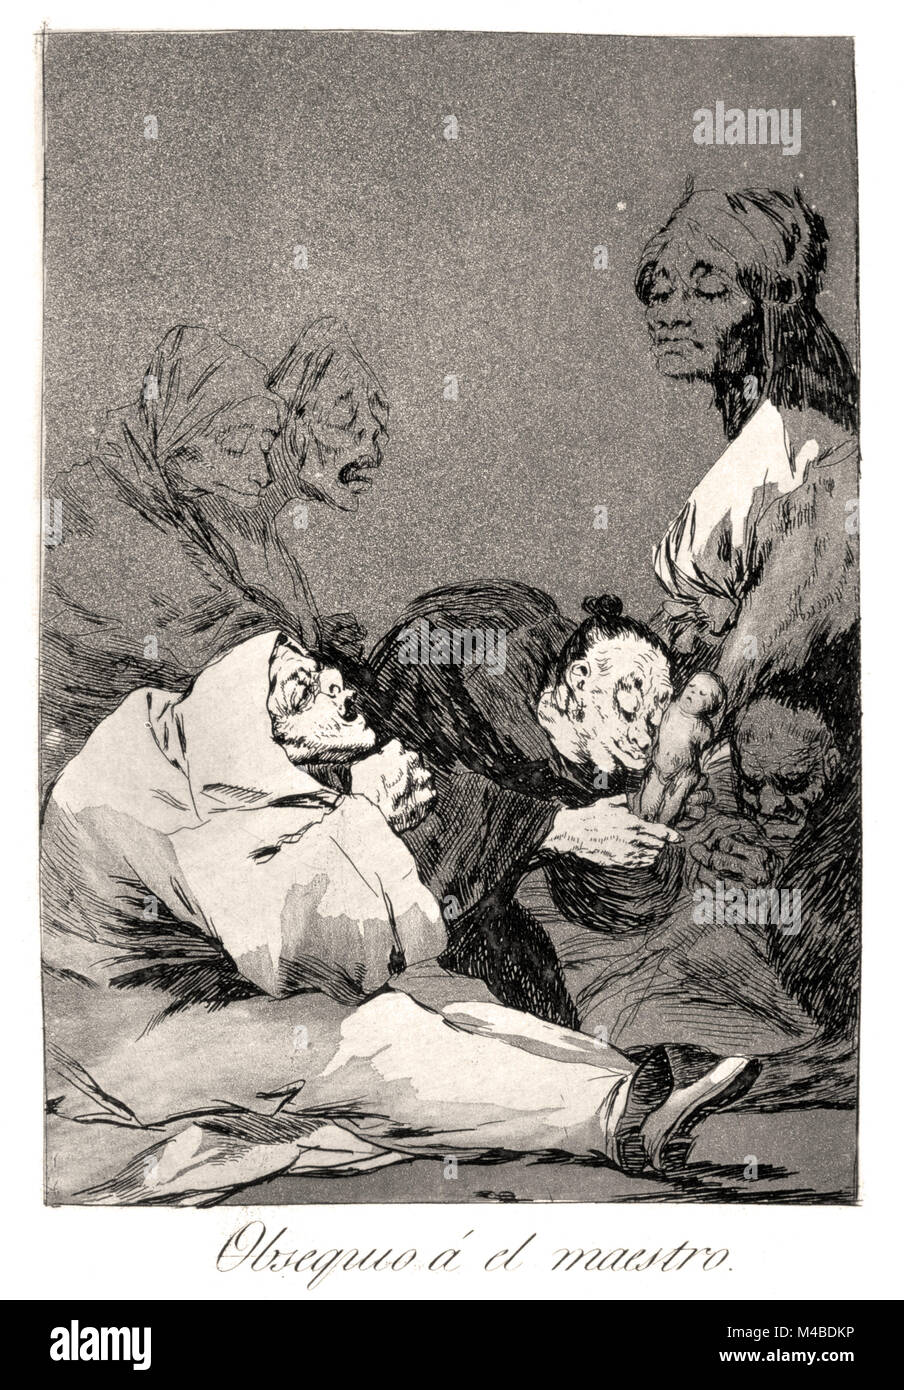 Francisco de Goya y Lucientes -  A gift for the master', 1799. Plate 47 of 'Los caprichos' Stock Photo